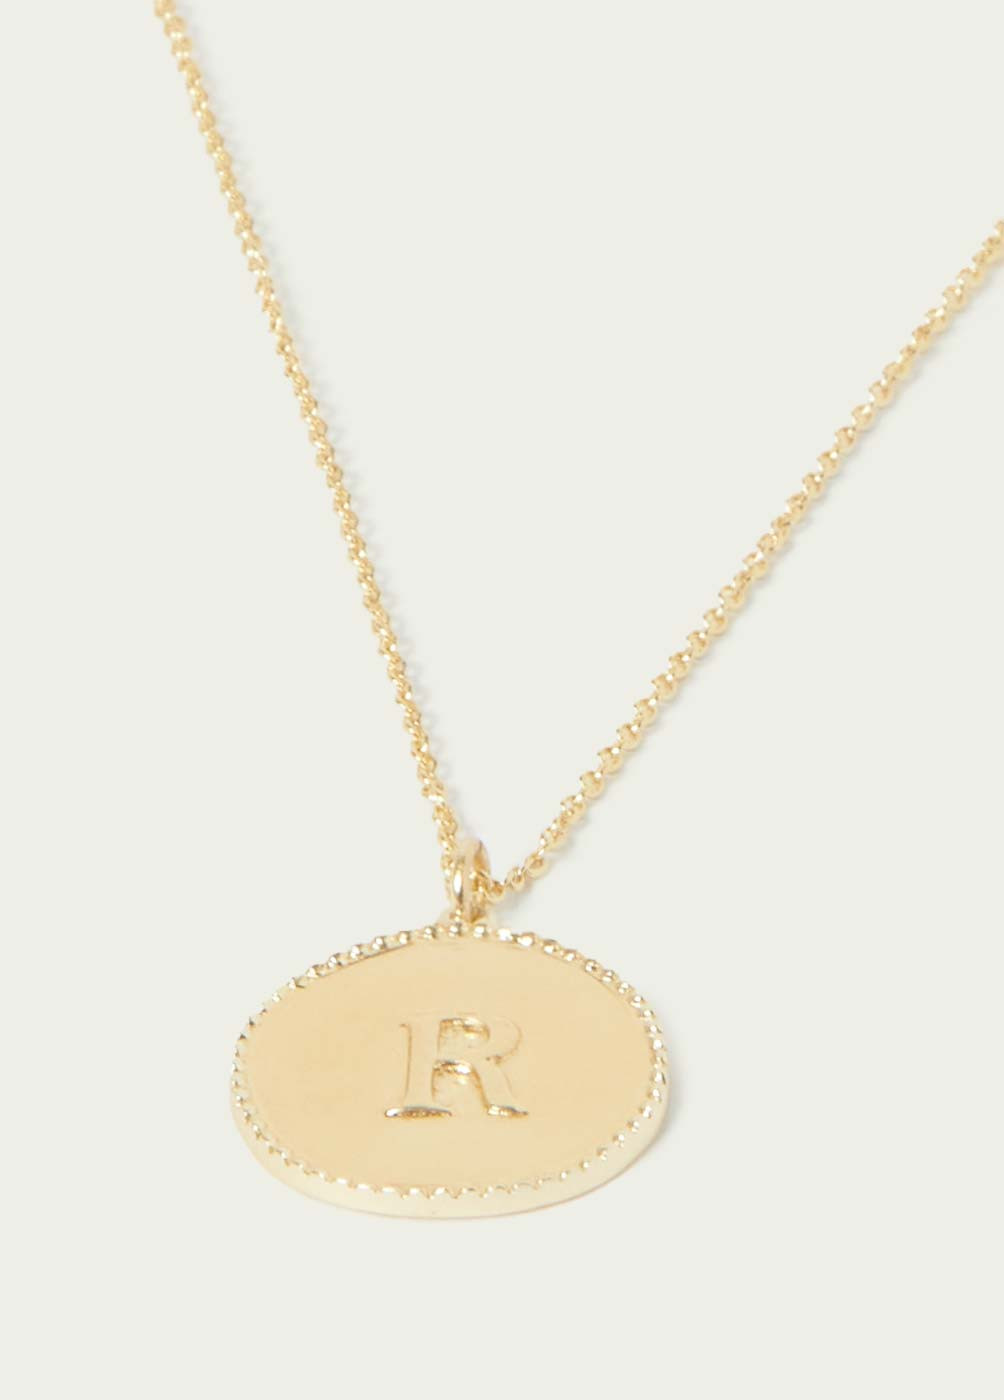 'R' INITIAL MEDALLION NECKLACE